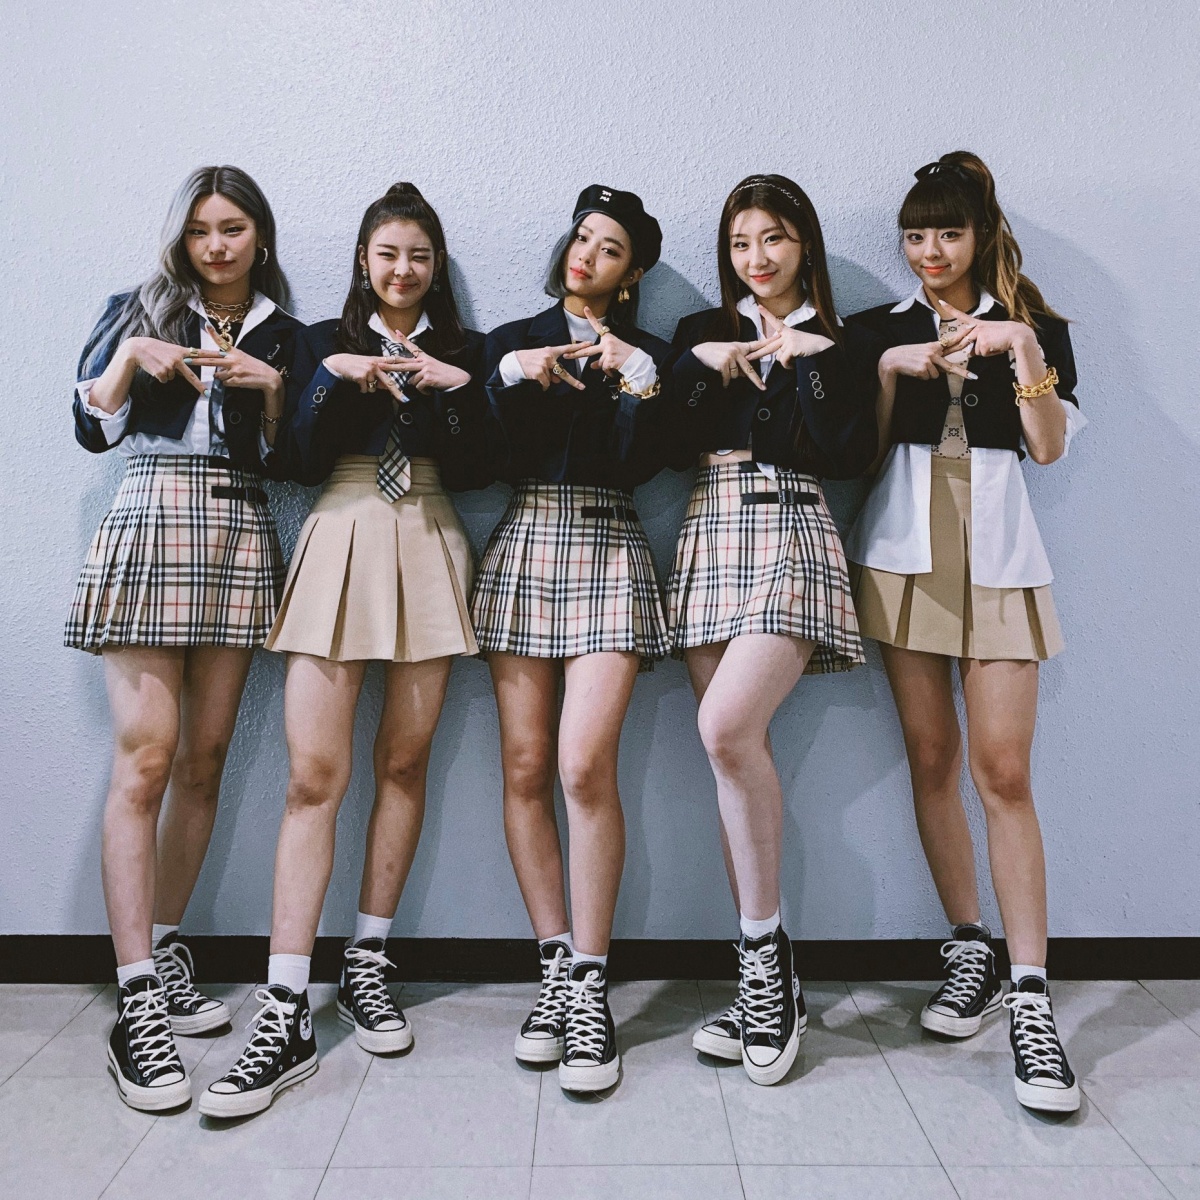 ITZY Tops YouTube Hits Chart for 4 Consecutive Weeks + Selected As K ...